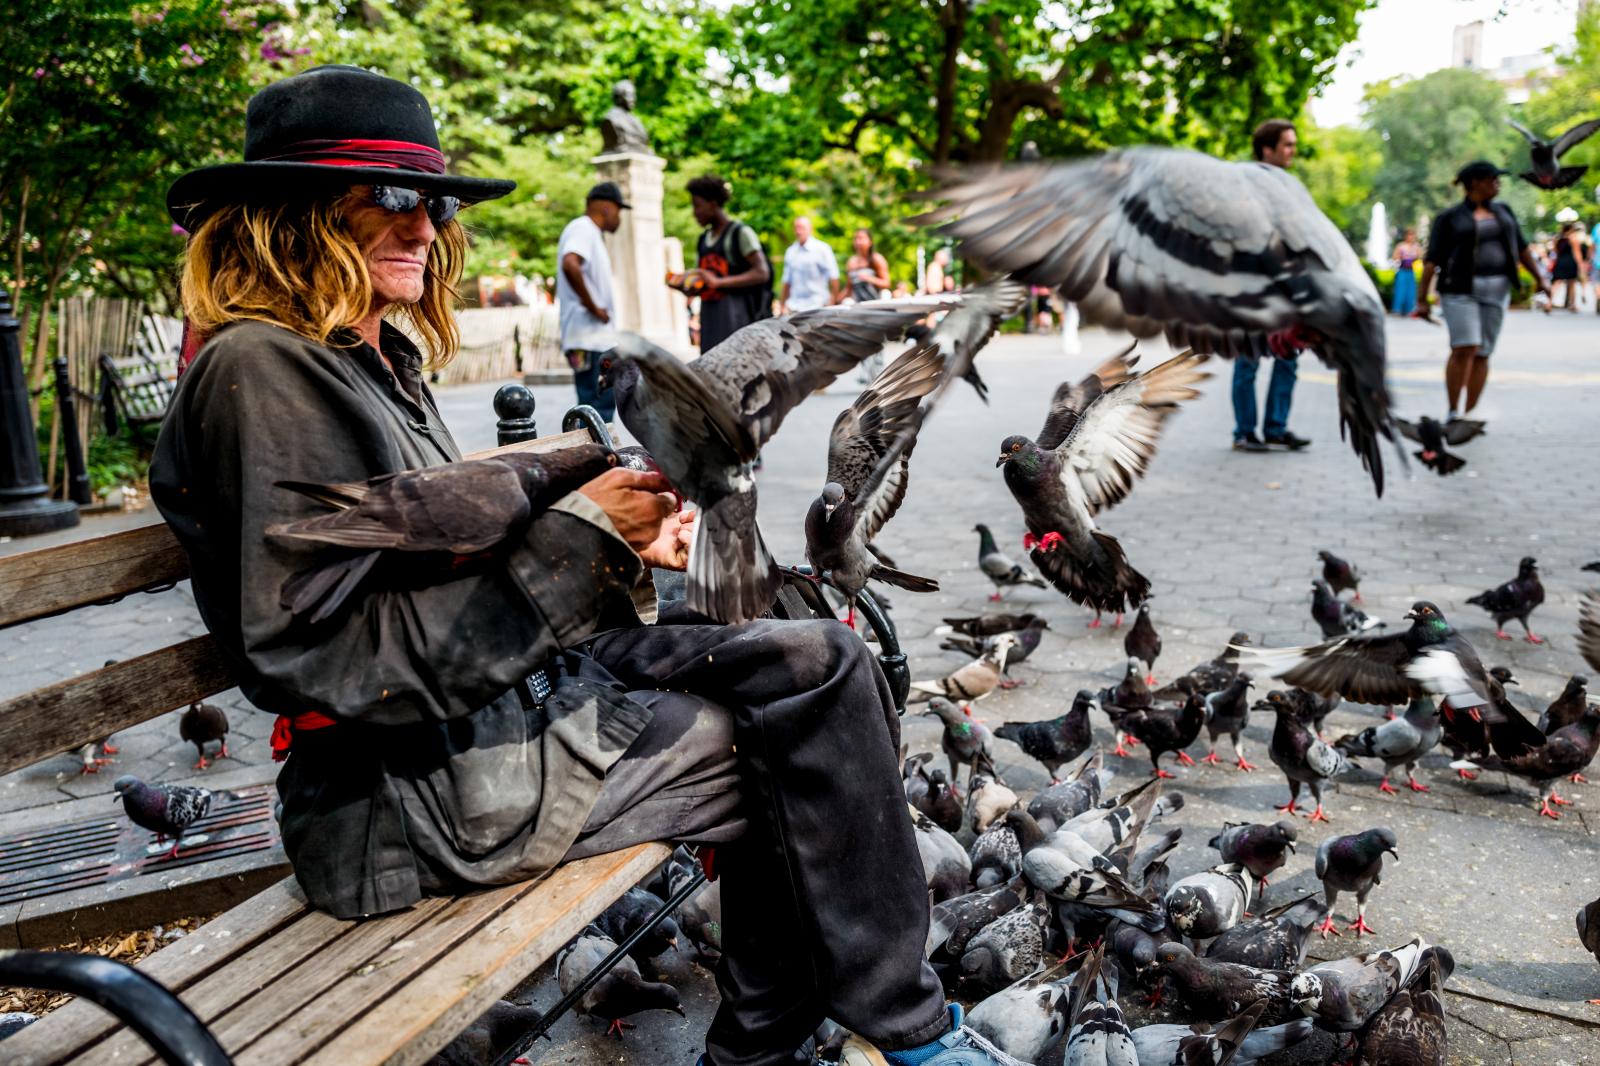 Street Photography/Color Works -  Washington Square Park, Manhattan NYC  August, 2015 